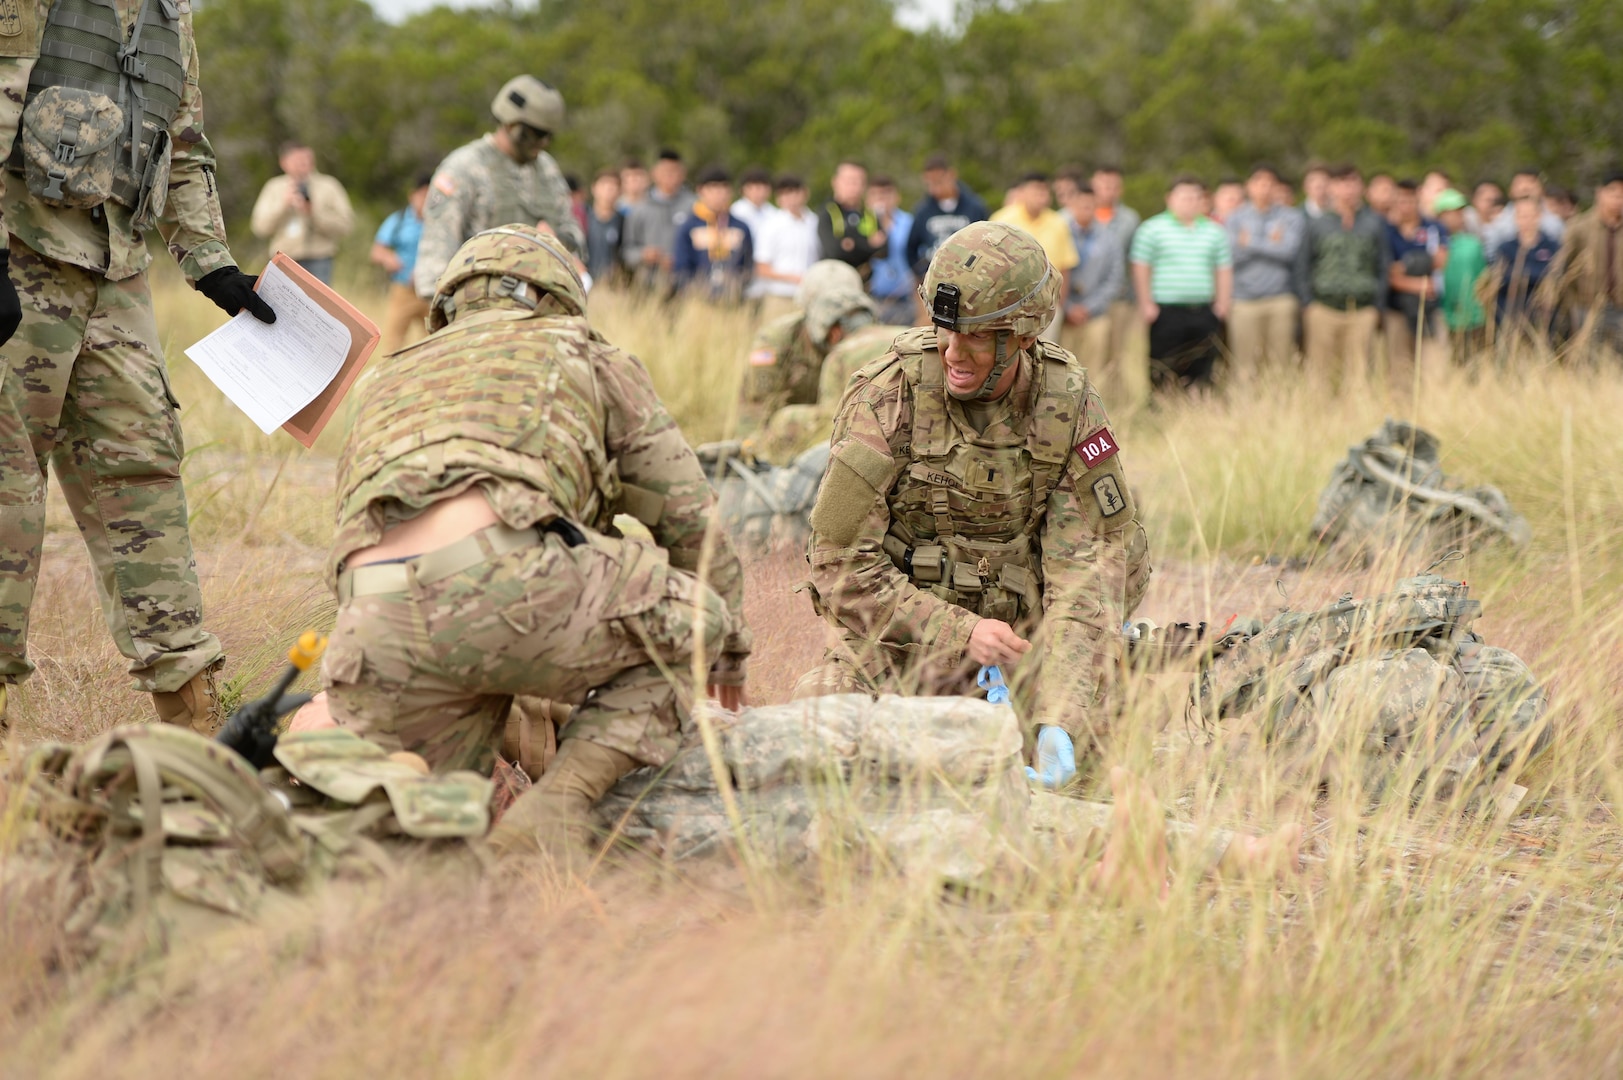 A pair of combat medics treats a simulated patient during the Best Medic Competition at JBSA-Camp Bullis Oct. 25. The 72-hour contest forces medics to perform feats of physical and emotional strength as well as critical thinking in hopes
to being named the Army’s best medics.